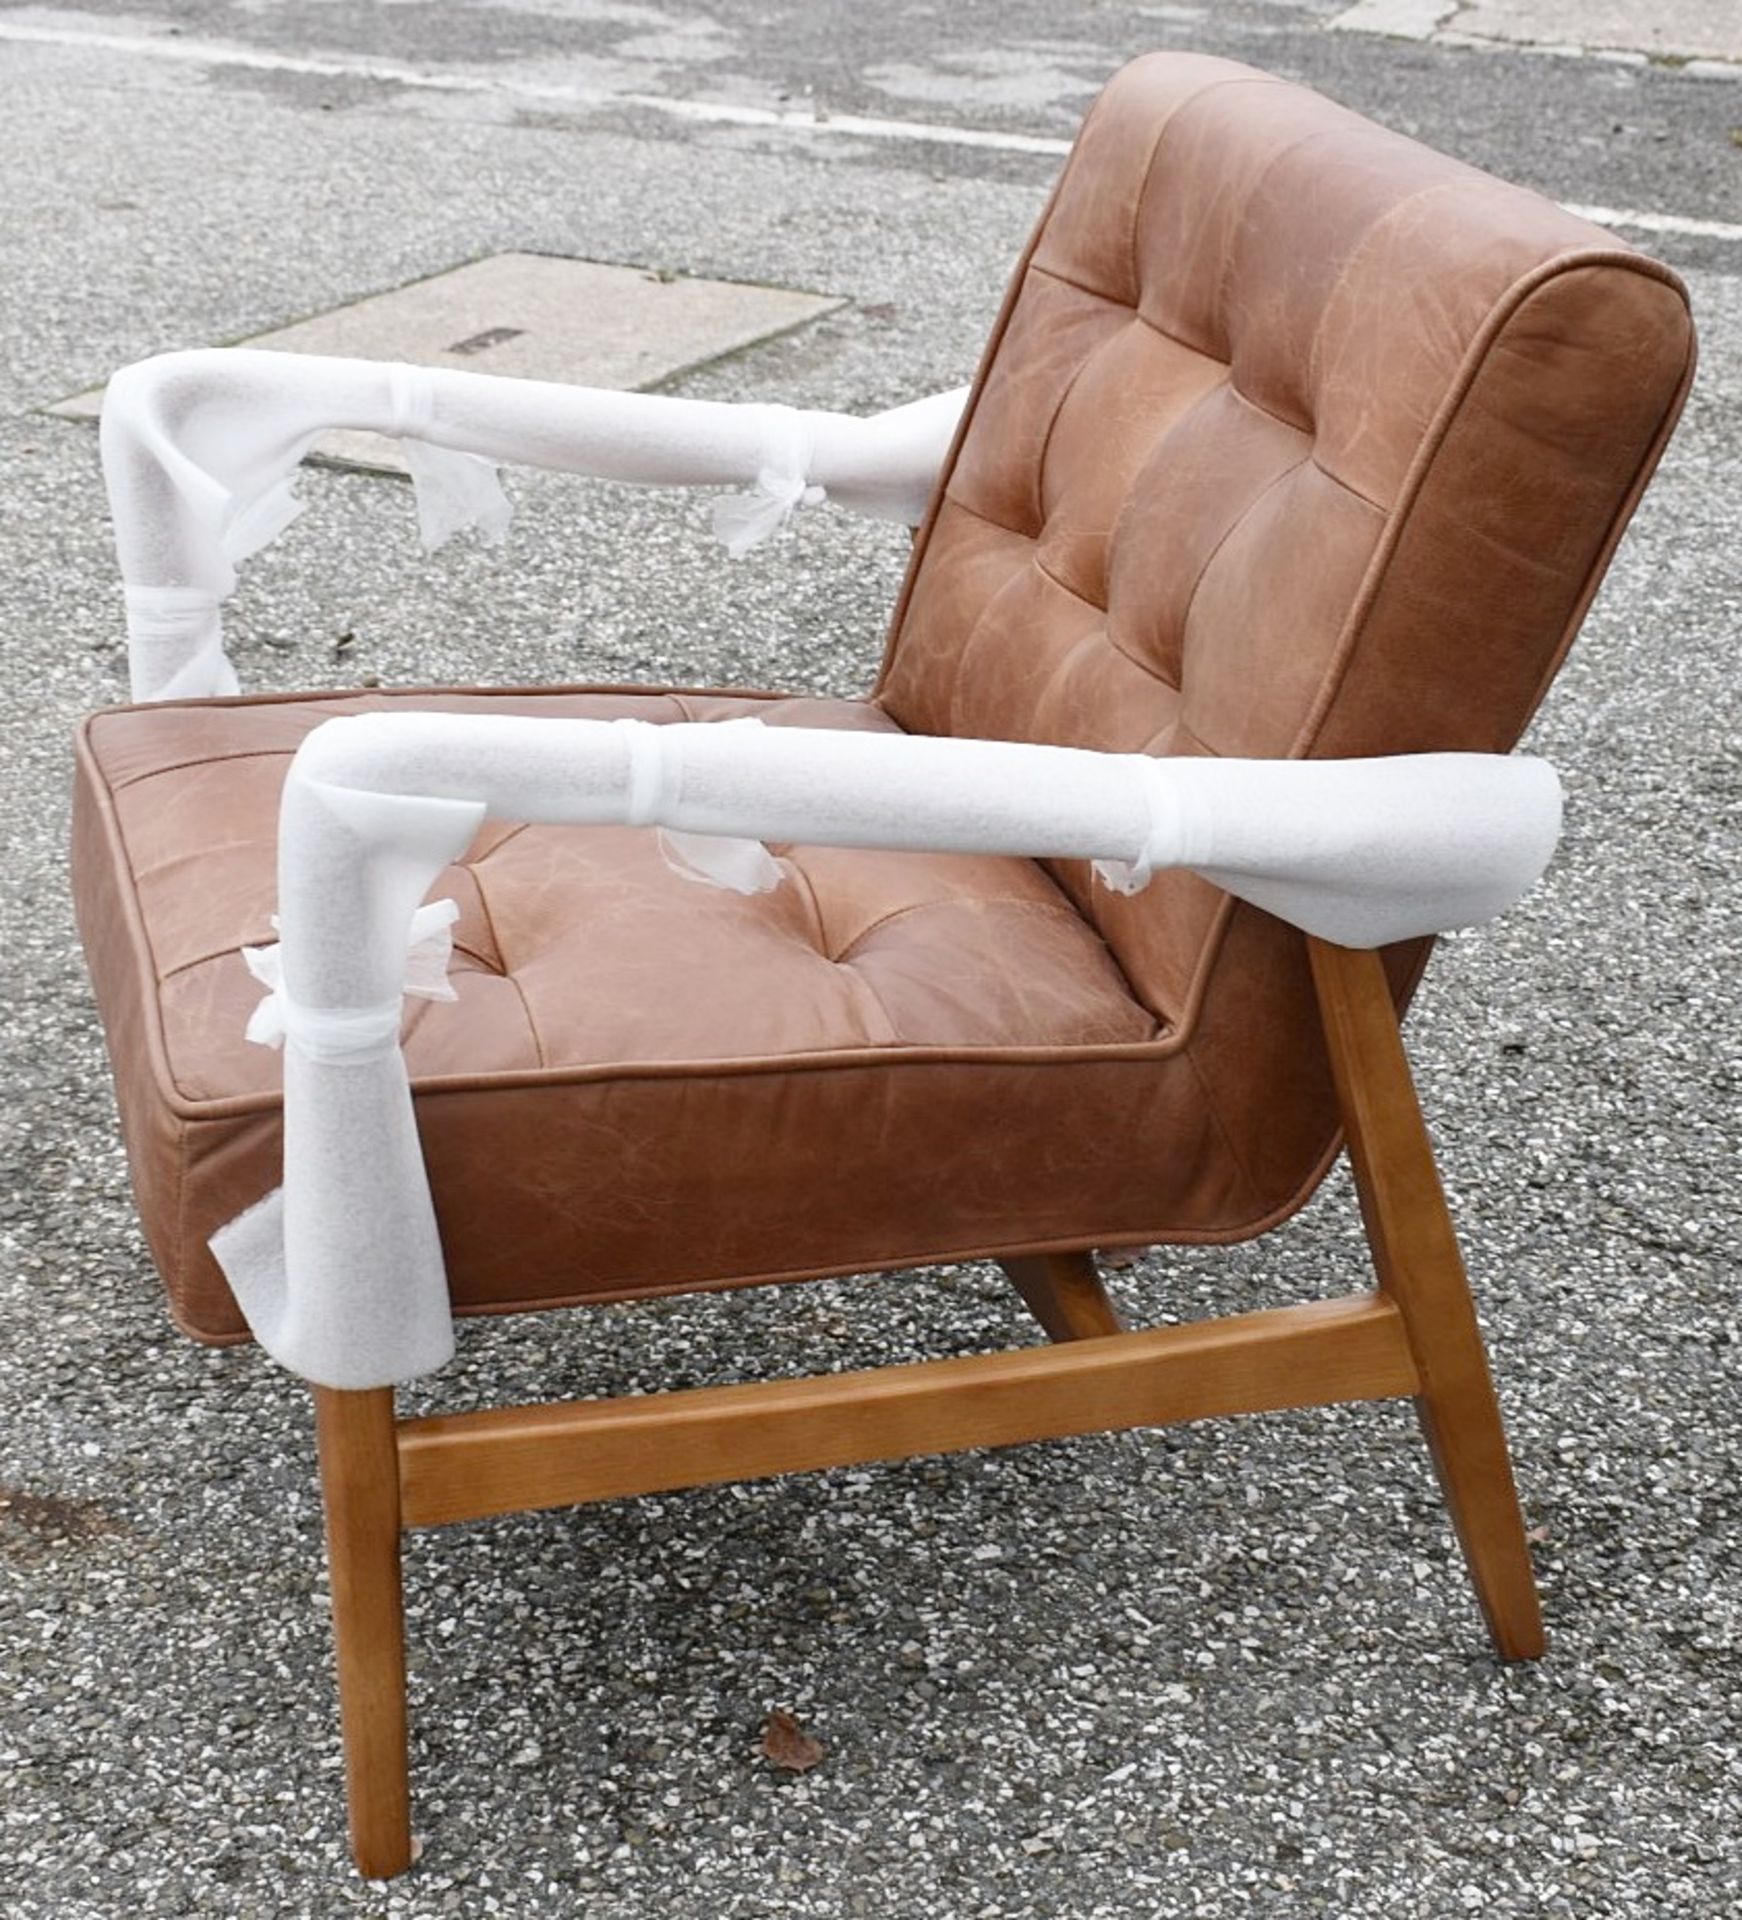 1 x 'Humber' Armchair Upholstered Vintage Brown Leather - New / Unused Stock - CL011 - Location: - Image 2 of 7